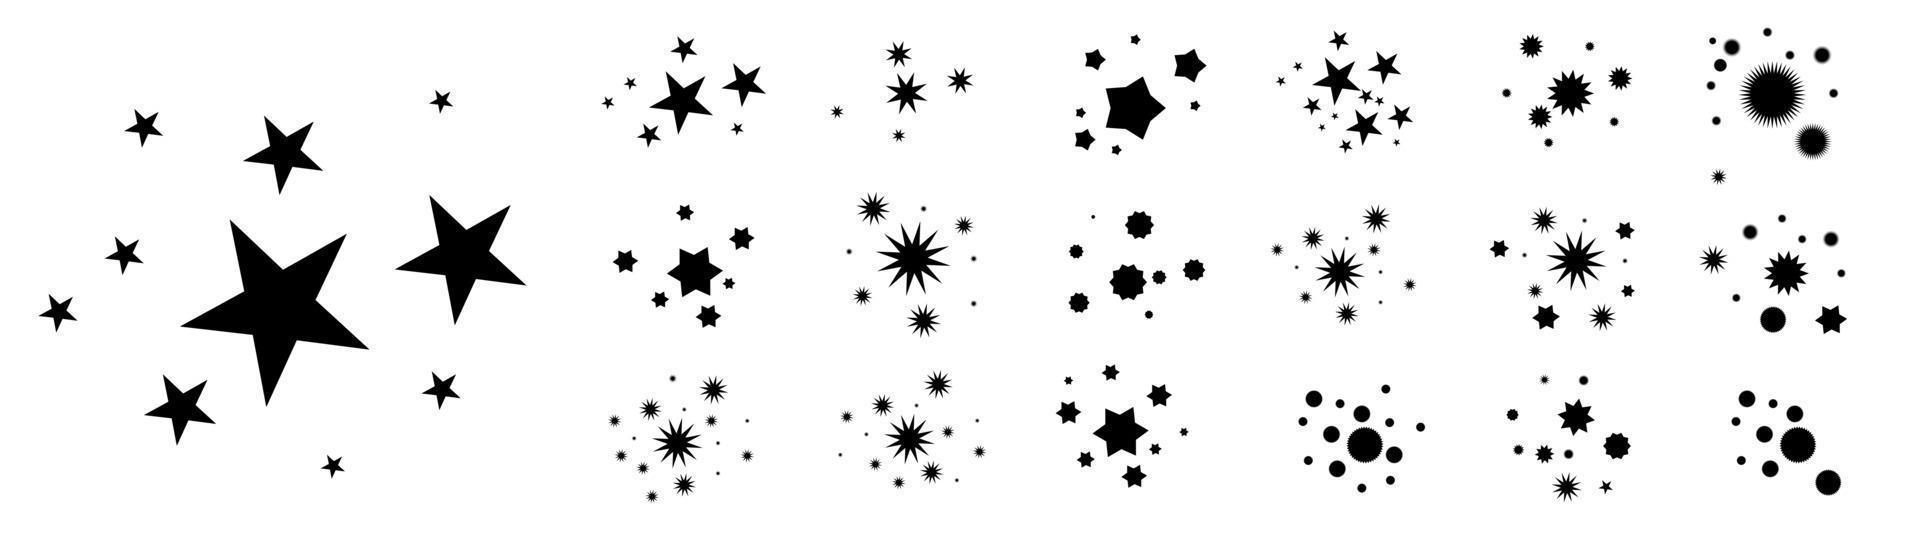 Star icon. Collection of illustrations of twinkling stars. Sparks, shining explosion in the sky. Christmas vector symbols isolated. Shine or fireworks. Vector dust. Flat design.